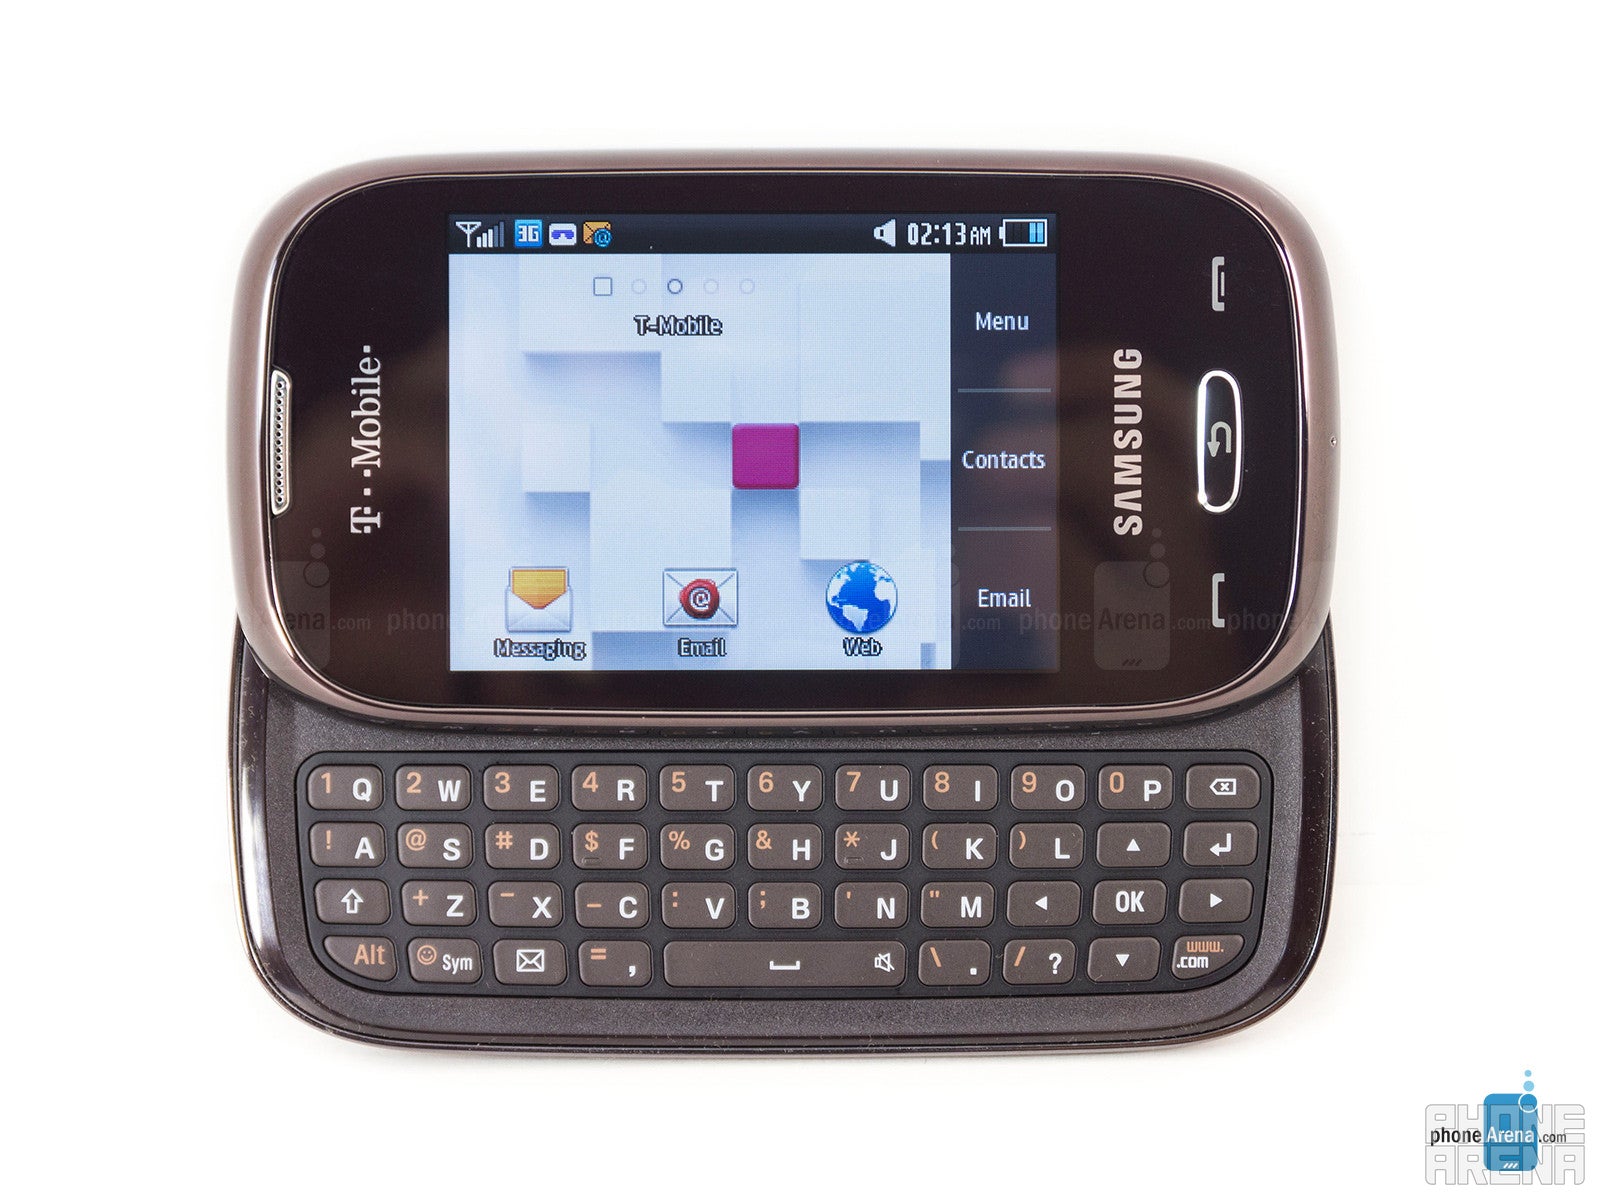 Samsung Gravity Q Review